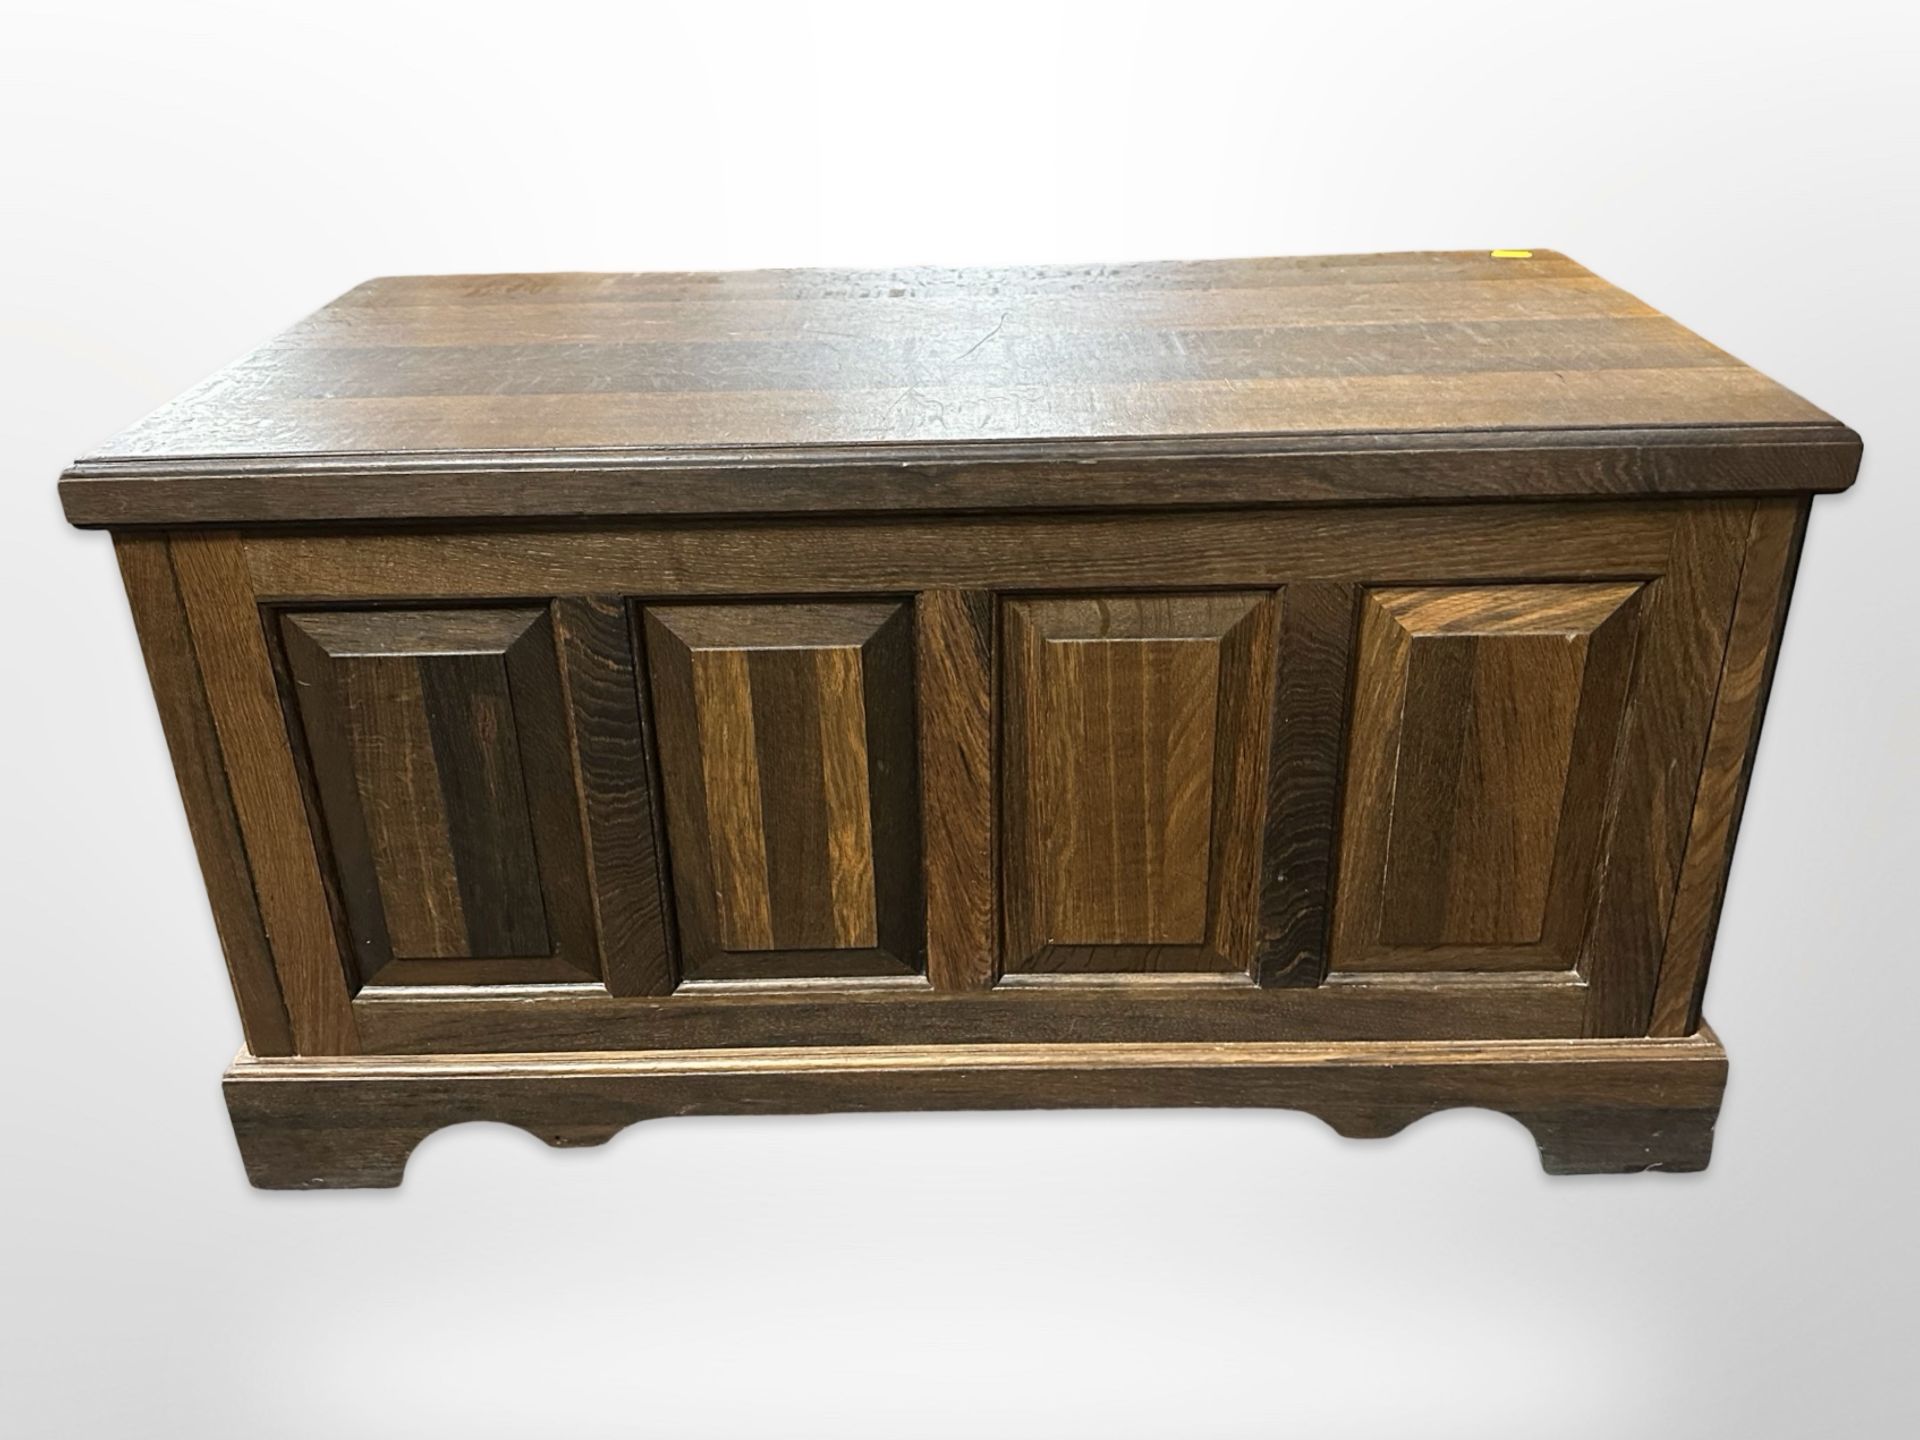 A reproduction panelled oak coffer,